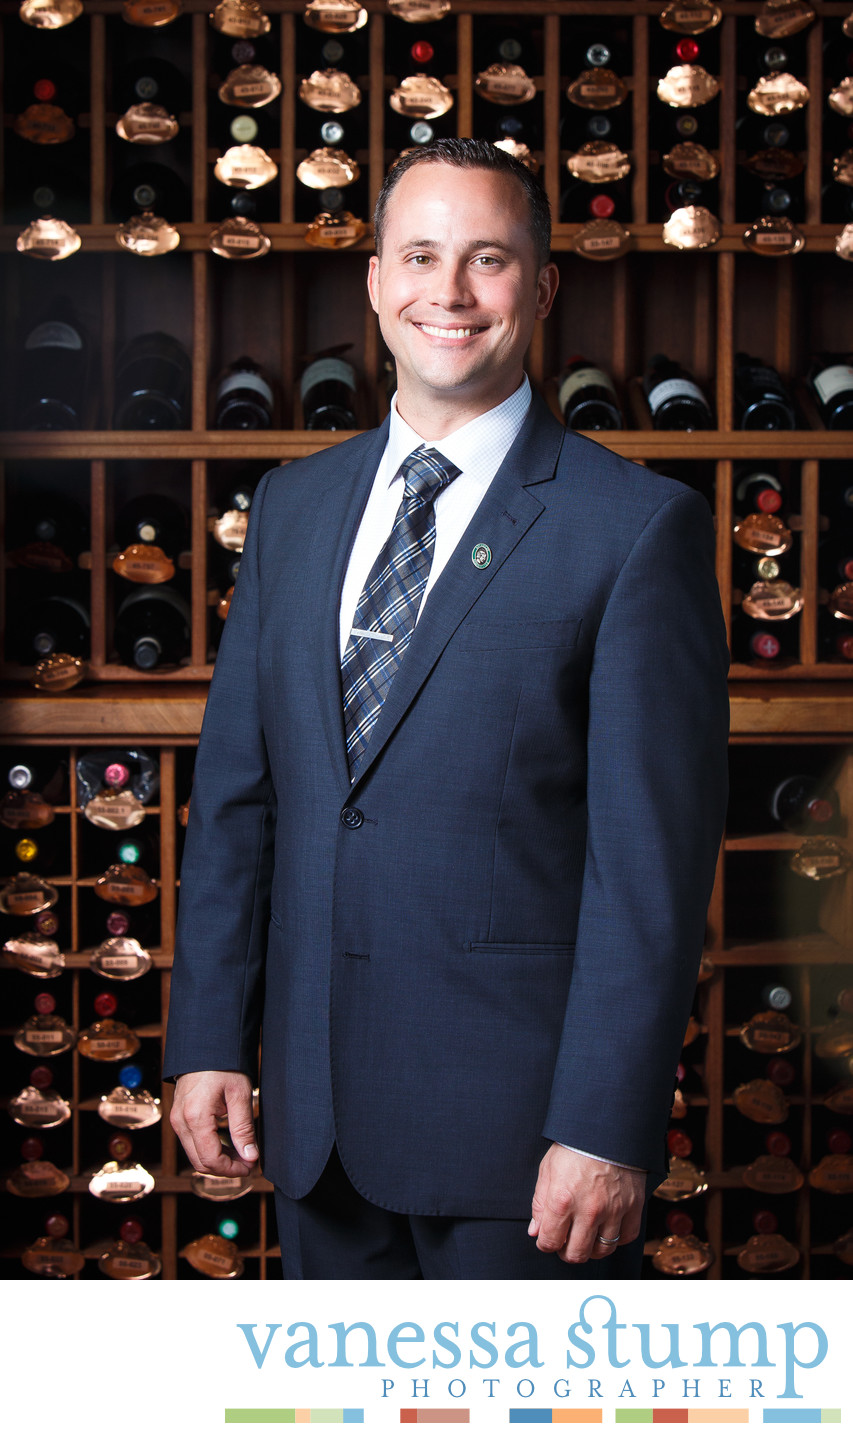 Troy Smith, Sommelier